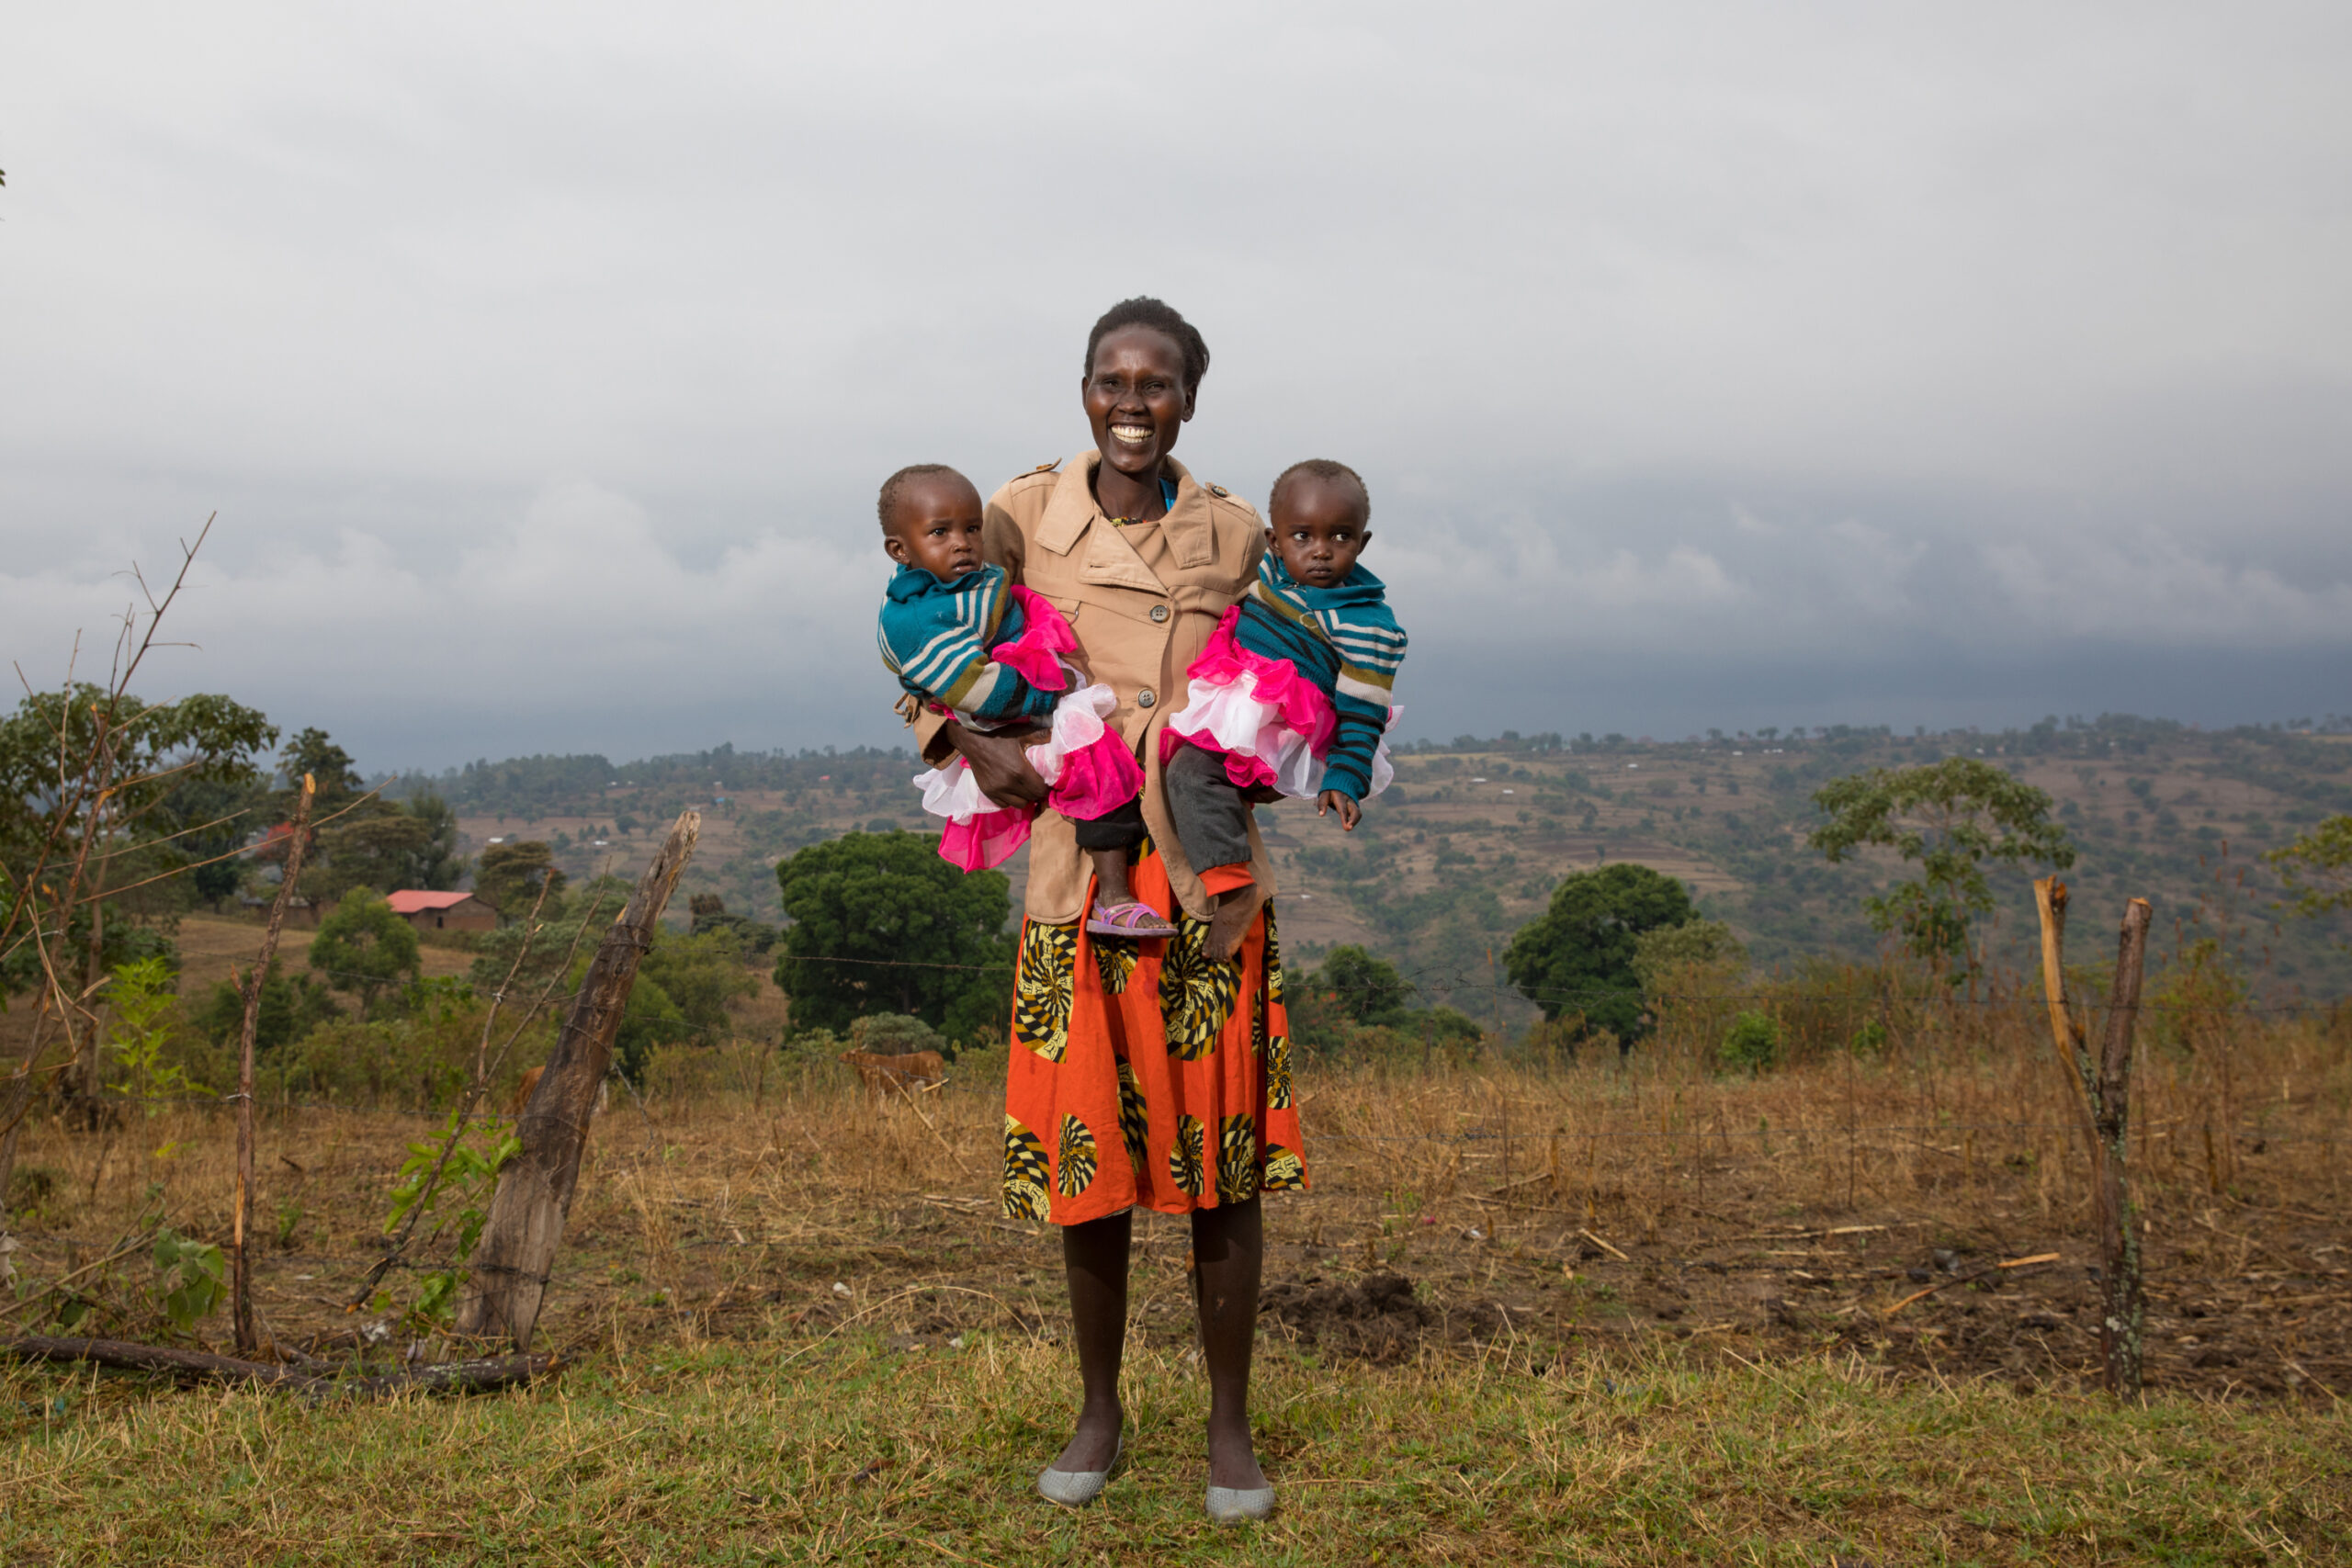 Angeline Chenangat, also known as Peris, at her home Tartar village, West Pokot, Kenya on March 4, 2018.  Angeline consented to a Saving Mothers Pretrm study.  Her sonograms indicated twins and her test indicated preterm positive.  She was given steroids for fetal lung development, along with daily prenatal vitamins.  Angeline stayed at the Maternity Waiting Home (KIROR) near Kapenguria Hospital until she delivered her preterm twins.

Saving Mothers visited West Pokot, Kenya and screened over 300 women and provided many types of surgery include molar pregnancy, ectopic pregnancy, hysterectomy, prolapse and fistula.